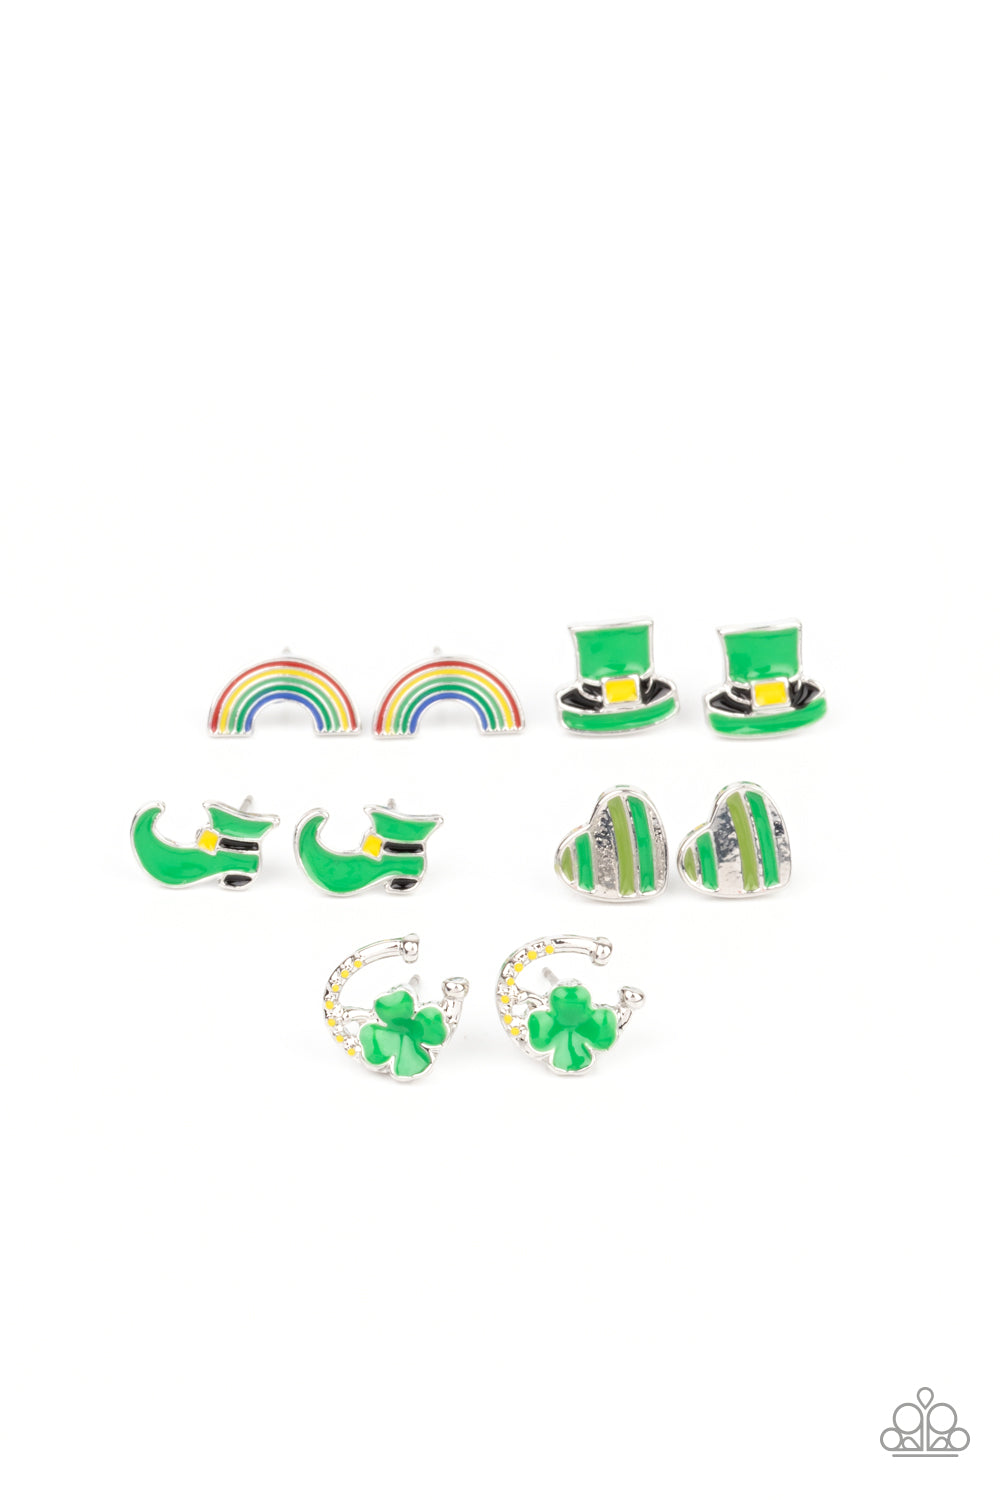 1 pack of 5 Lil Precious St. Patrick's Day Earrings